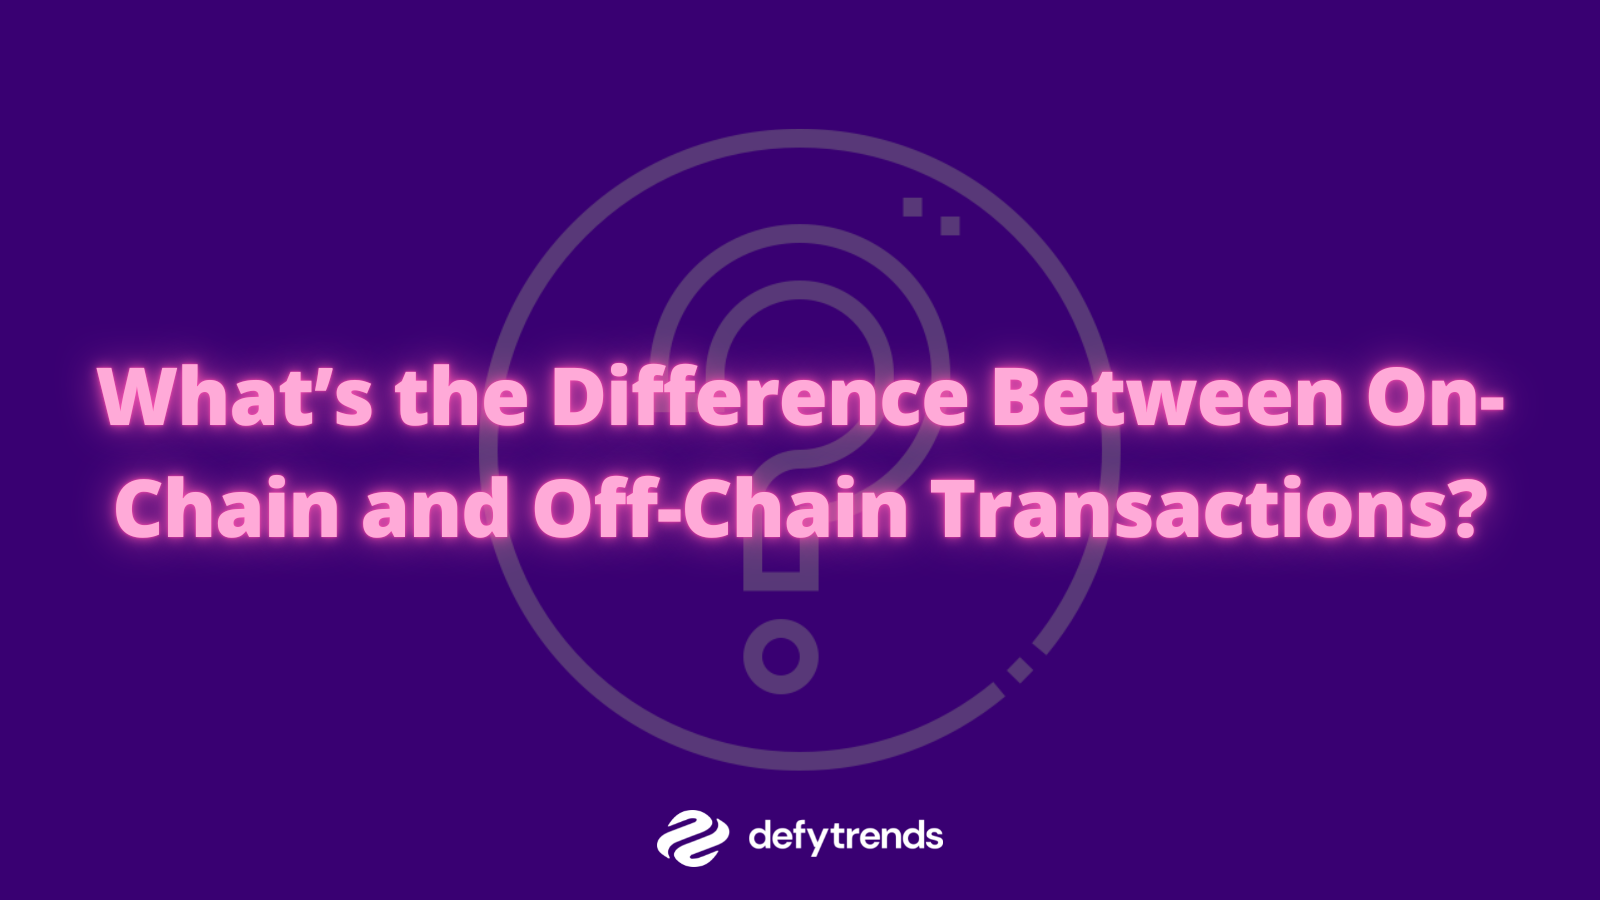 What’s the Difference Between On-Chain and Off-Chain Transactions?